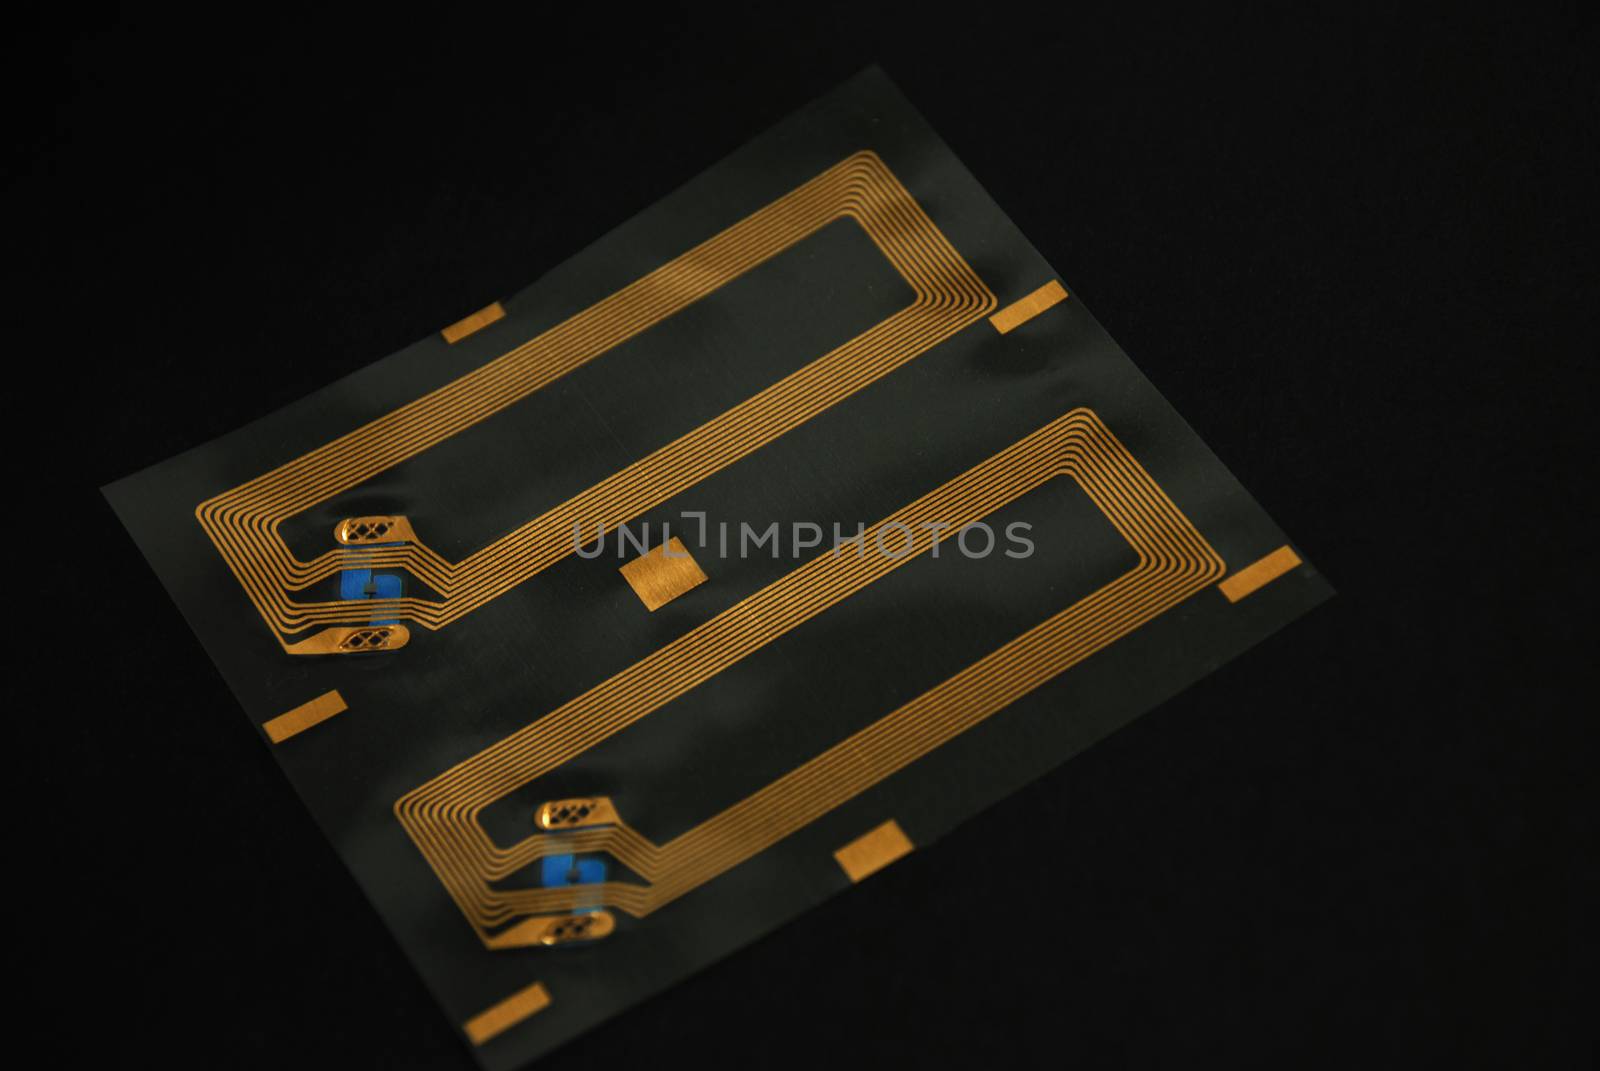 stock pictures of rfid tags used for tracking and identification purposes